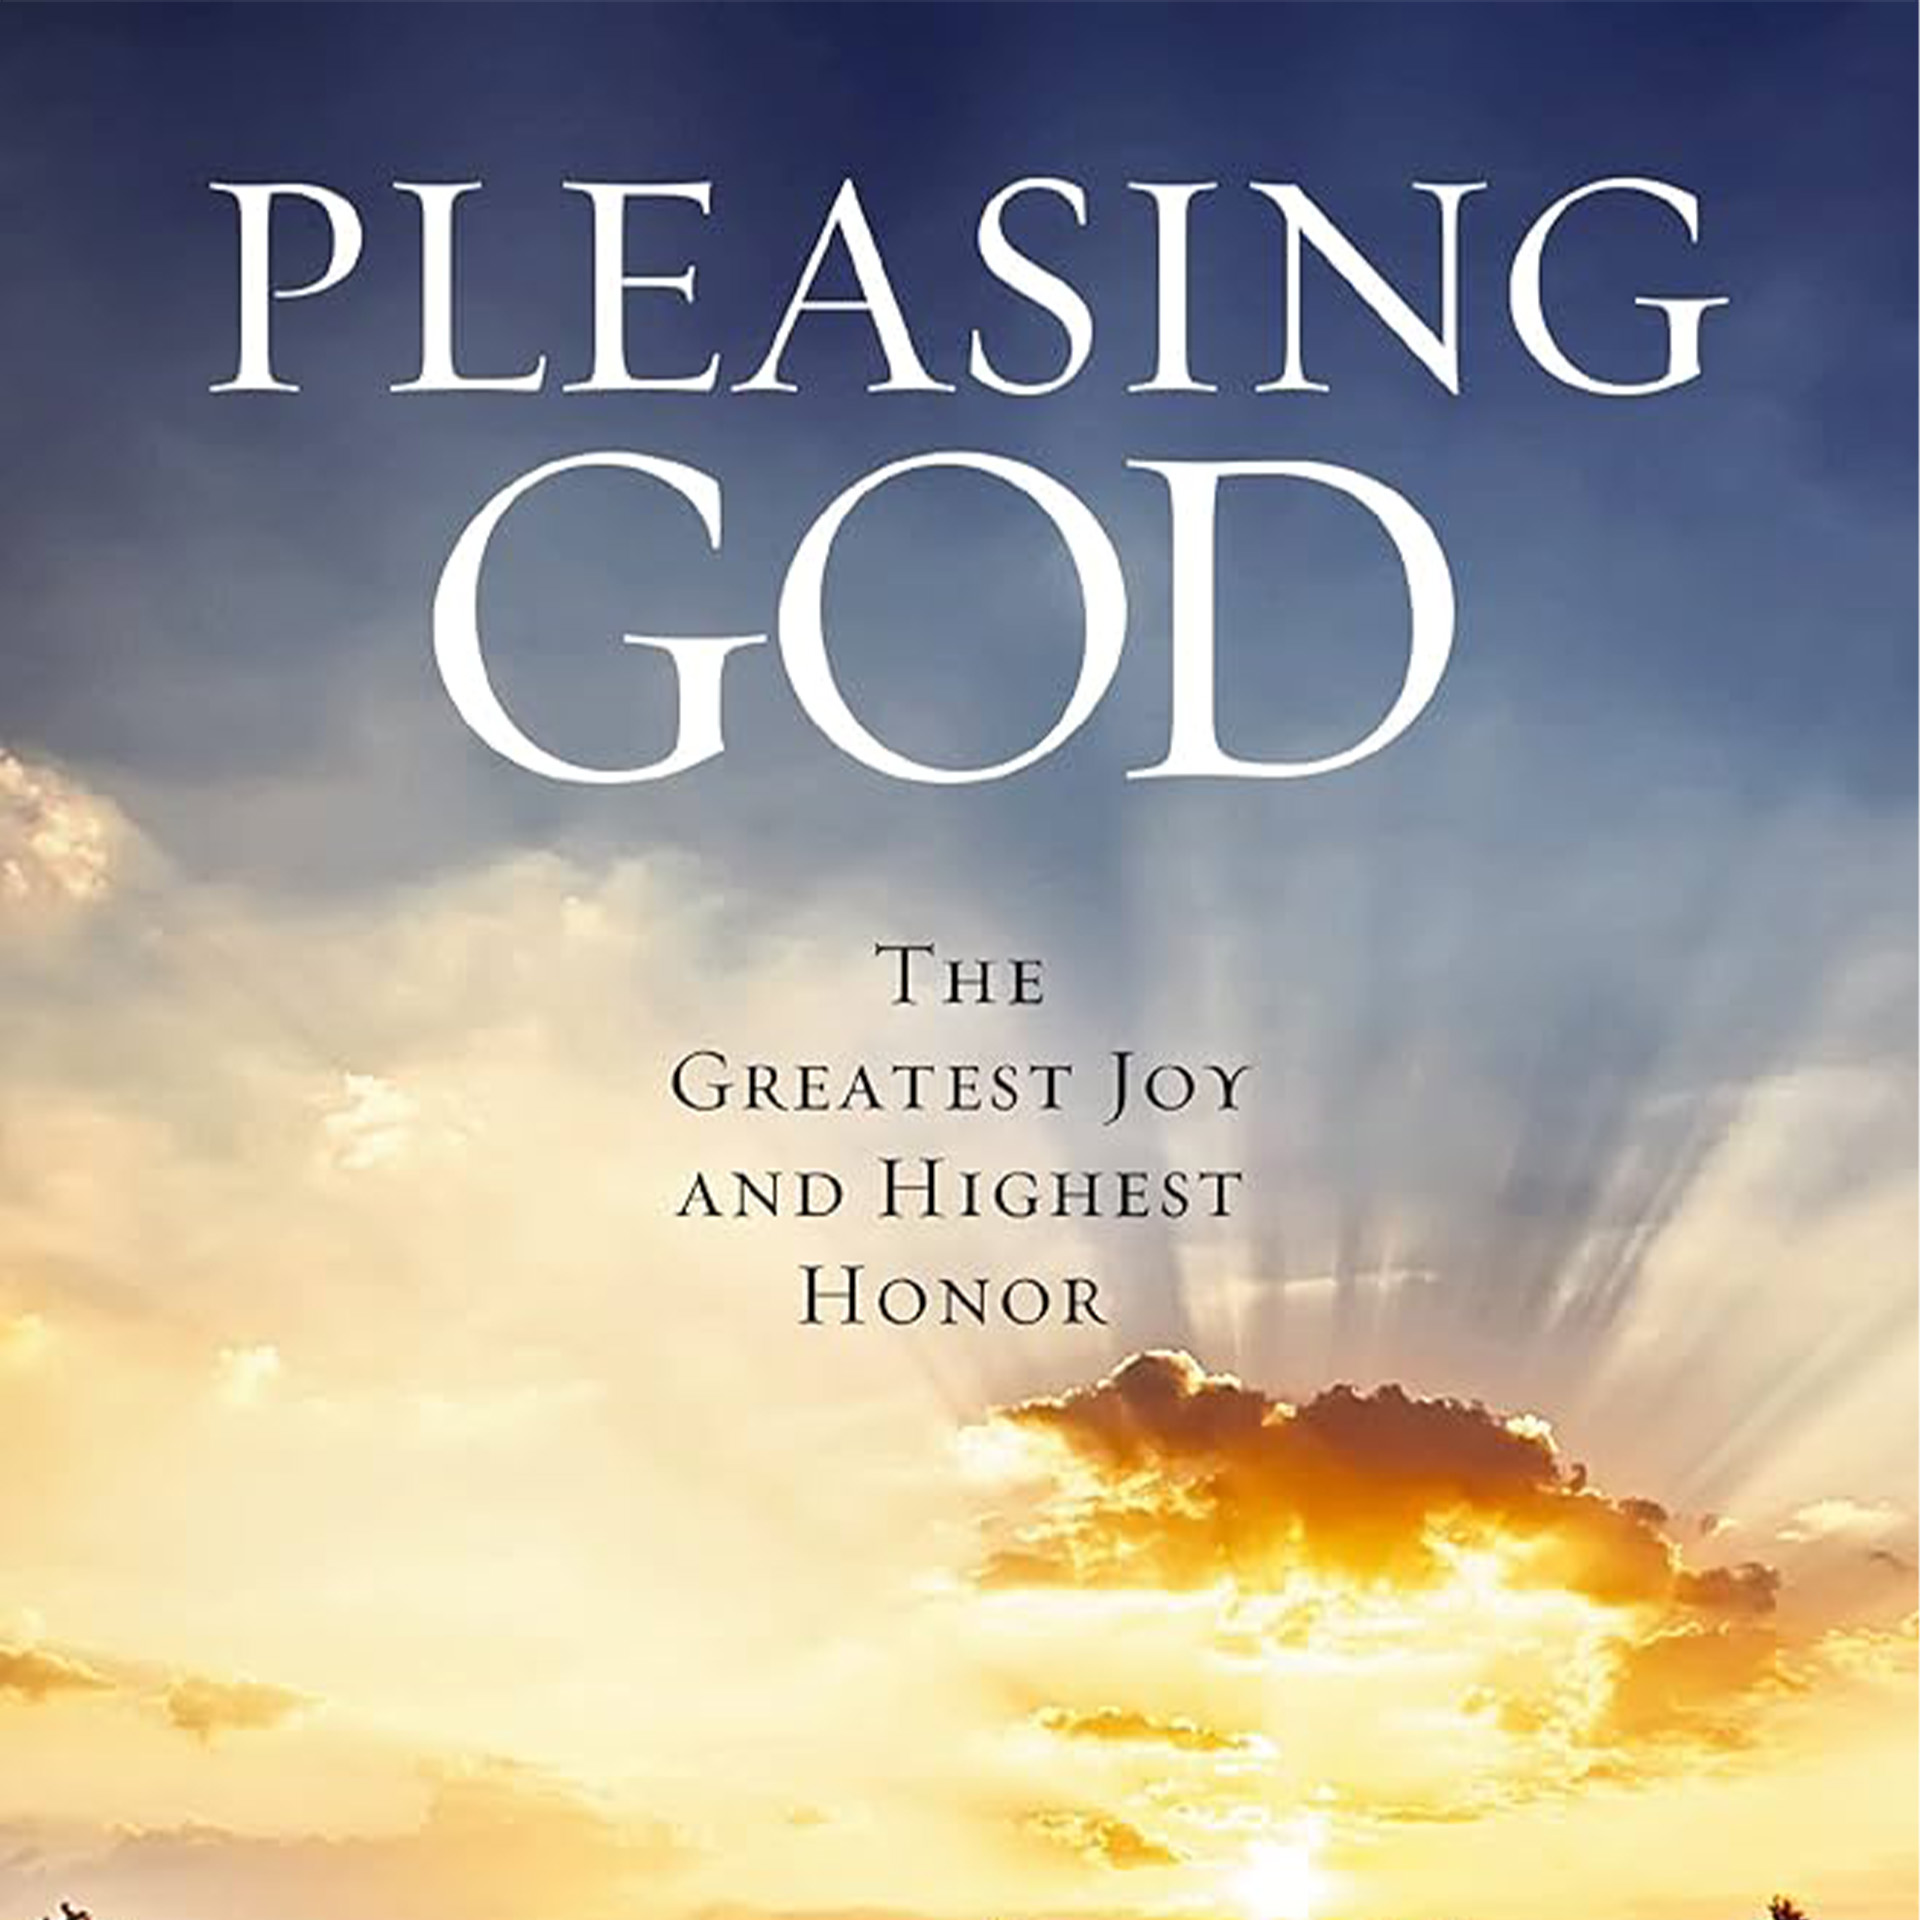 Pleasing God: The Greatest Joy and Highest Honor by R. T. Kendall